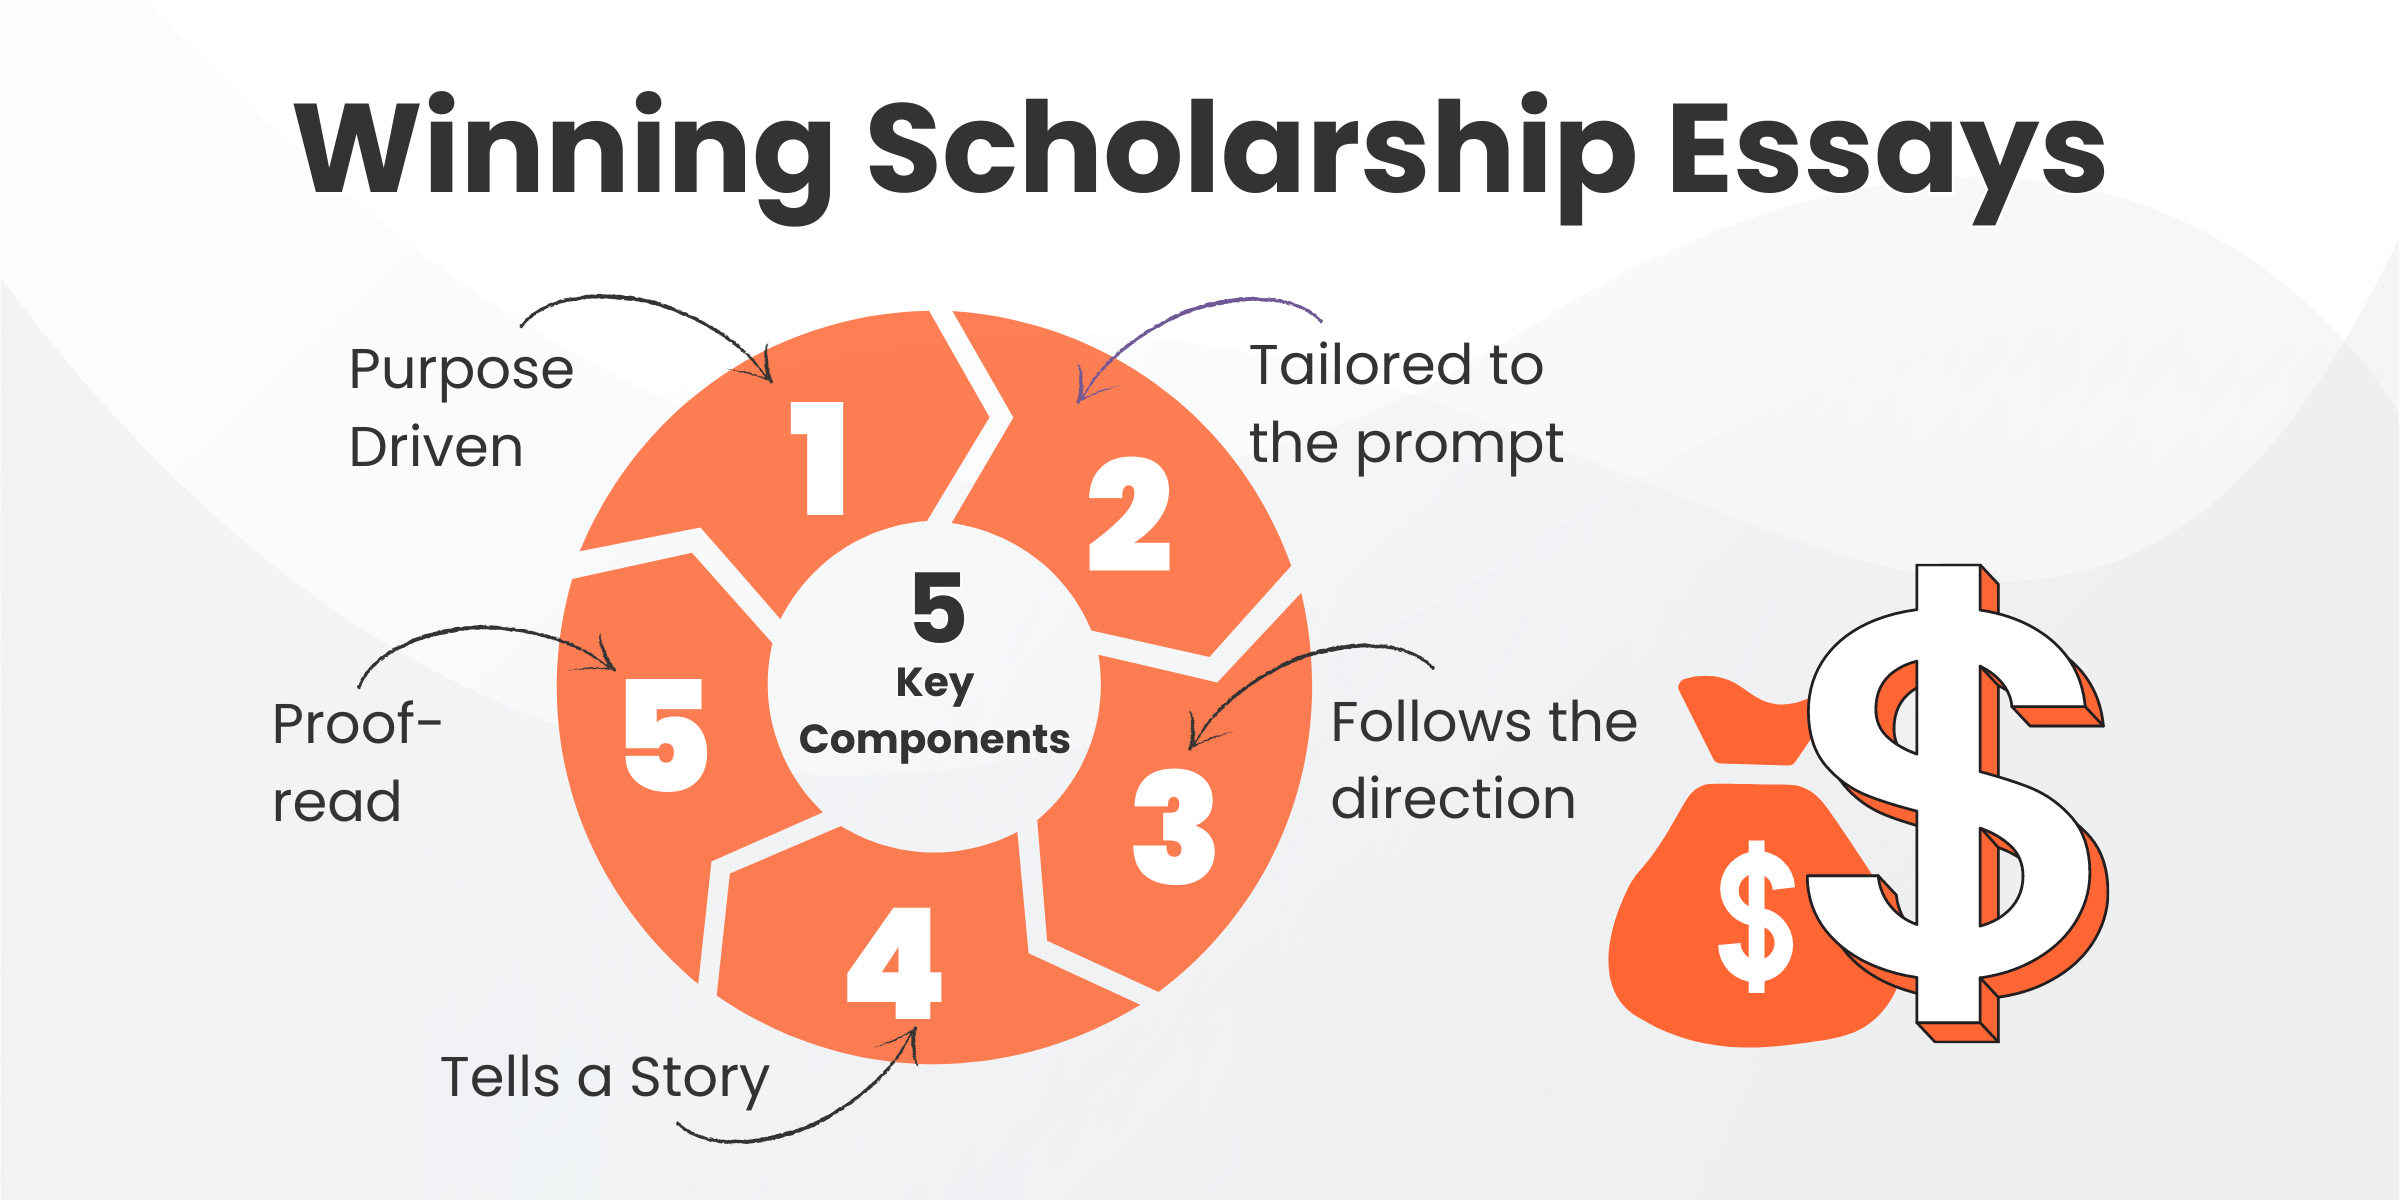 Study Abroad How to write winning scholarship essay